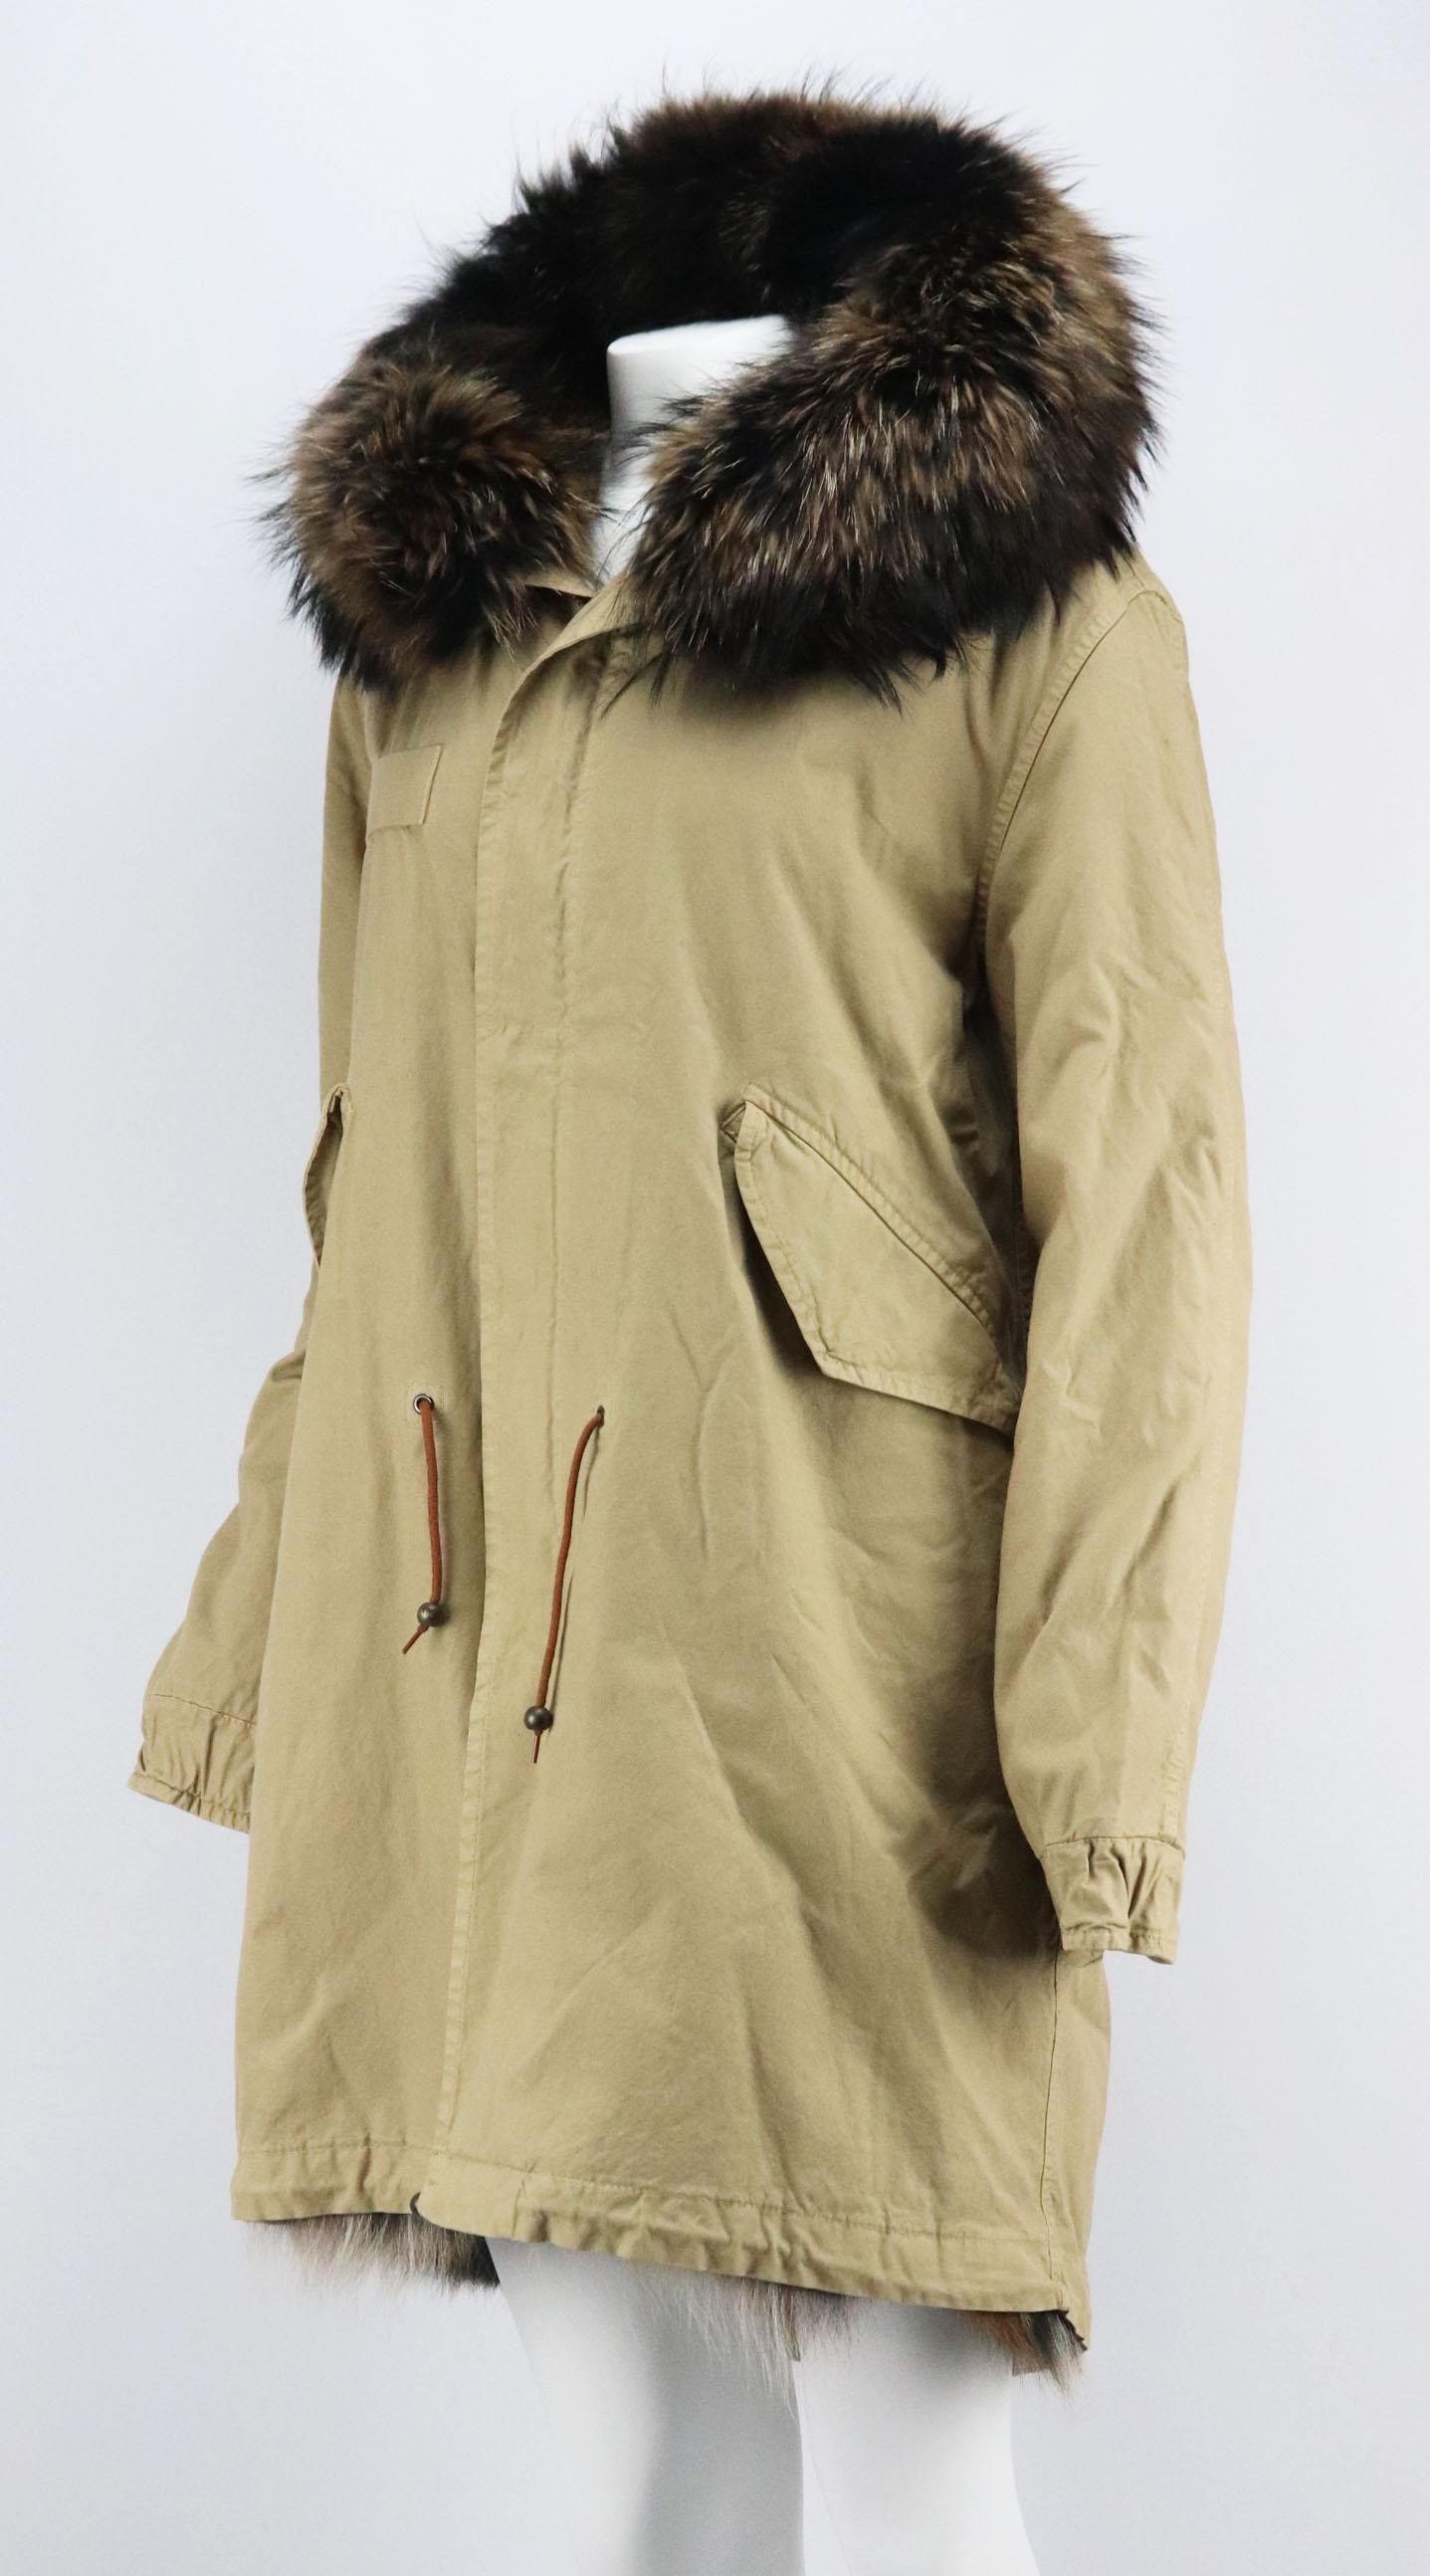 Inspired by vintage military styles, MR & MRS ITALY's parka is cut from durable beige cotton-canvas to keep you cozy as the temperatures drops, it's fully lined in soft brown coyote-fur and has an oversized fuzzy hood in raccoon-fur for added